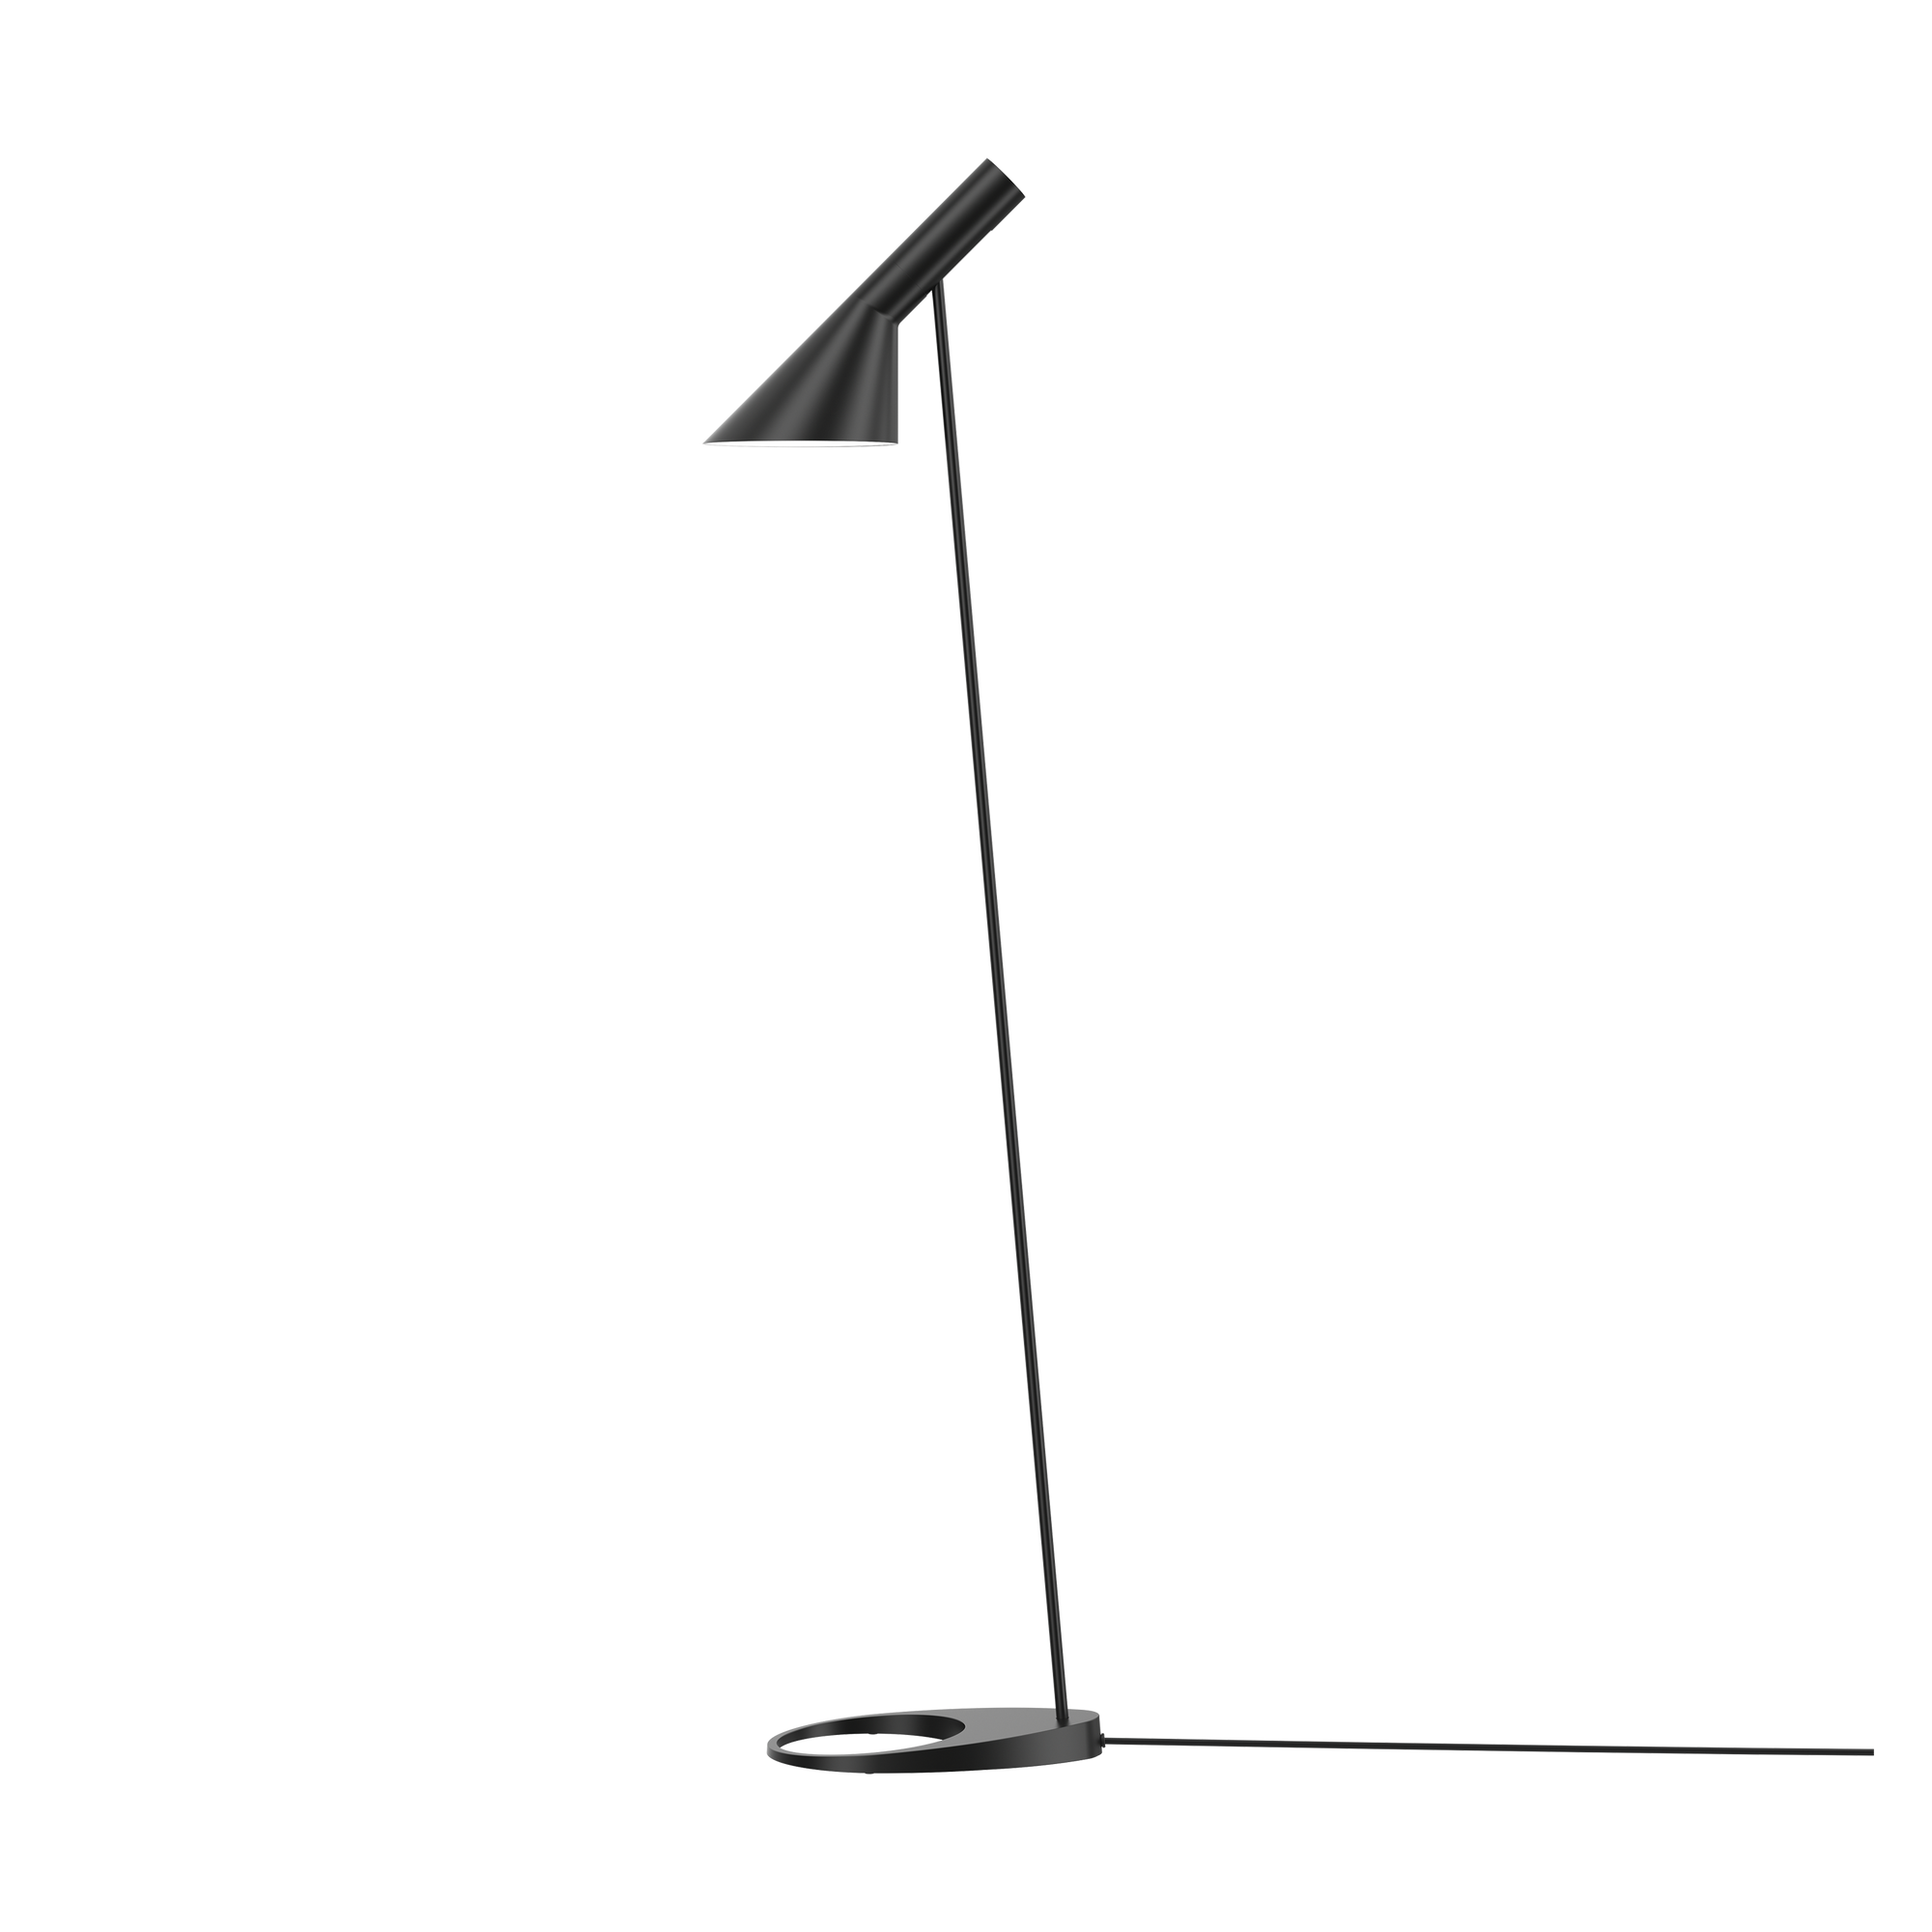 Originally designed for the SAS Royal Hotel in Copenhagen, in 1957, the AJ Lamp is among Arne Jacobsen's most significant design icons.